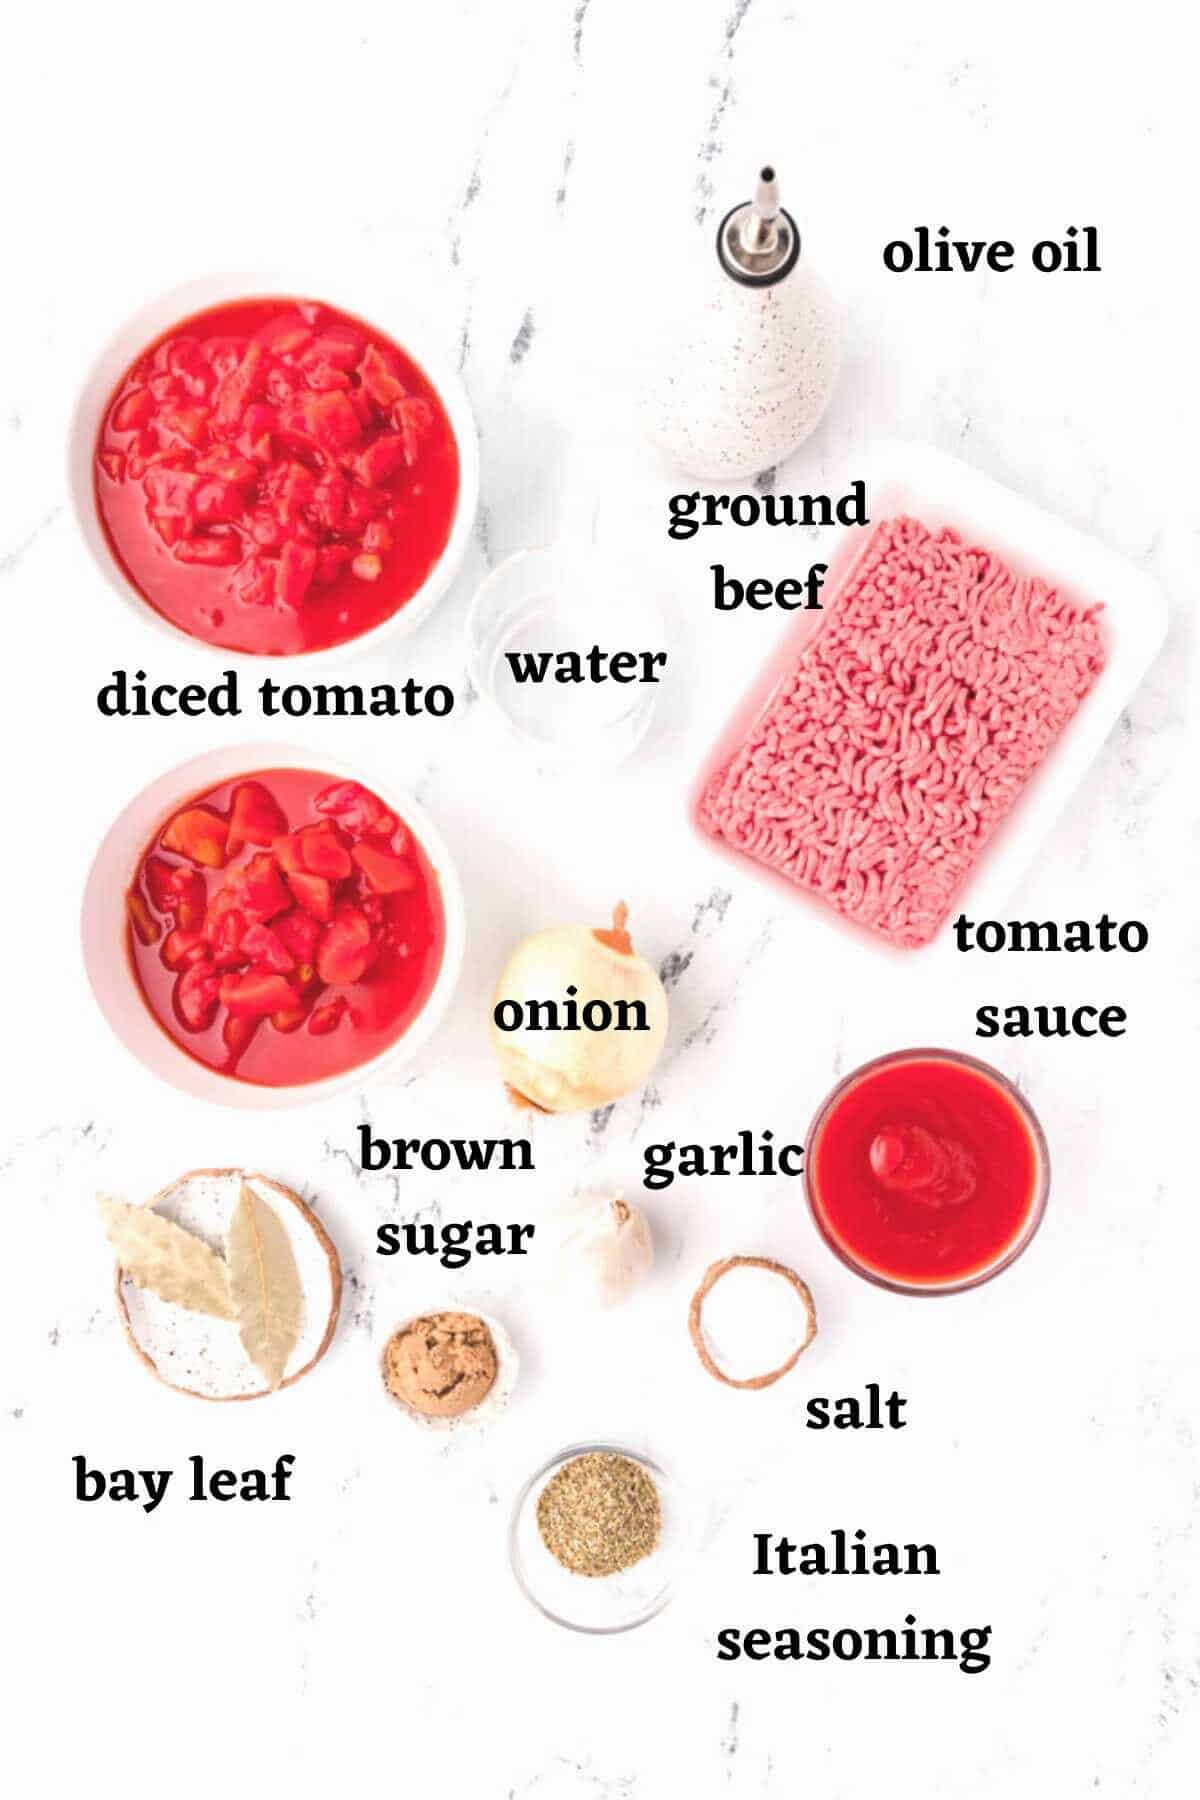 Ingredients needed to make spaghetti sauce with ground beef.